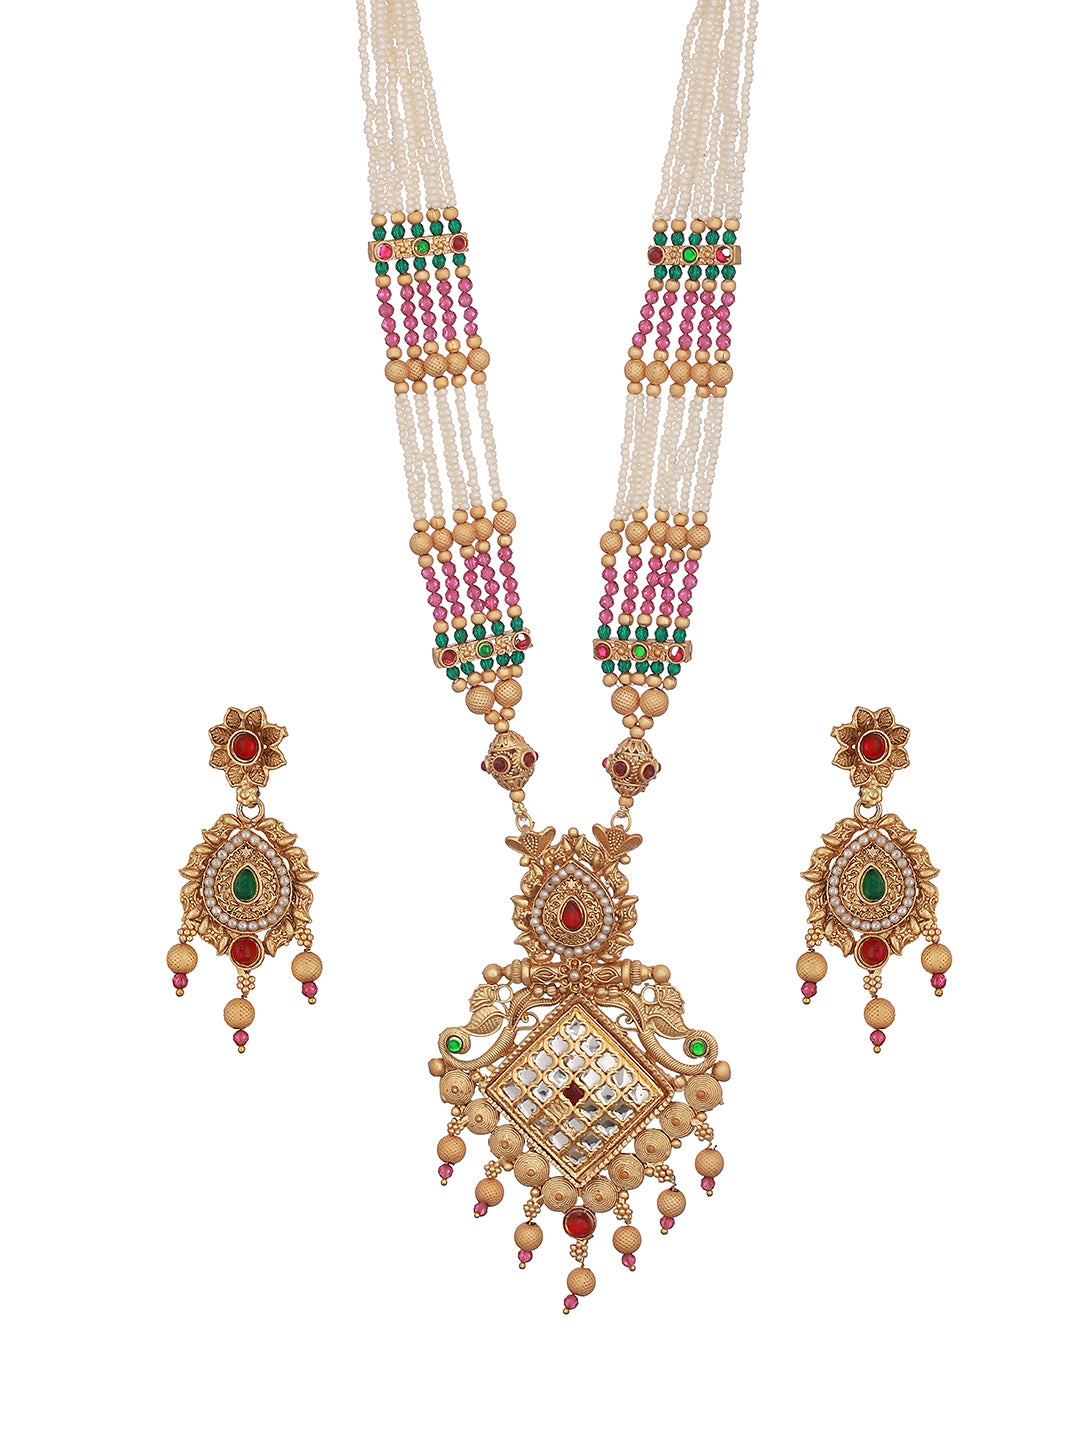 24K Gold-Plated White & Purple Beaded Handcrafted Traditional Necklace Set